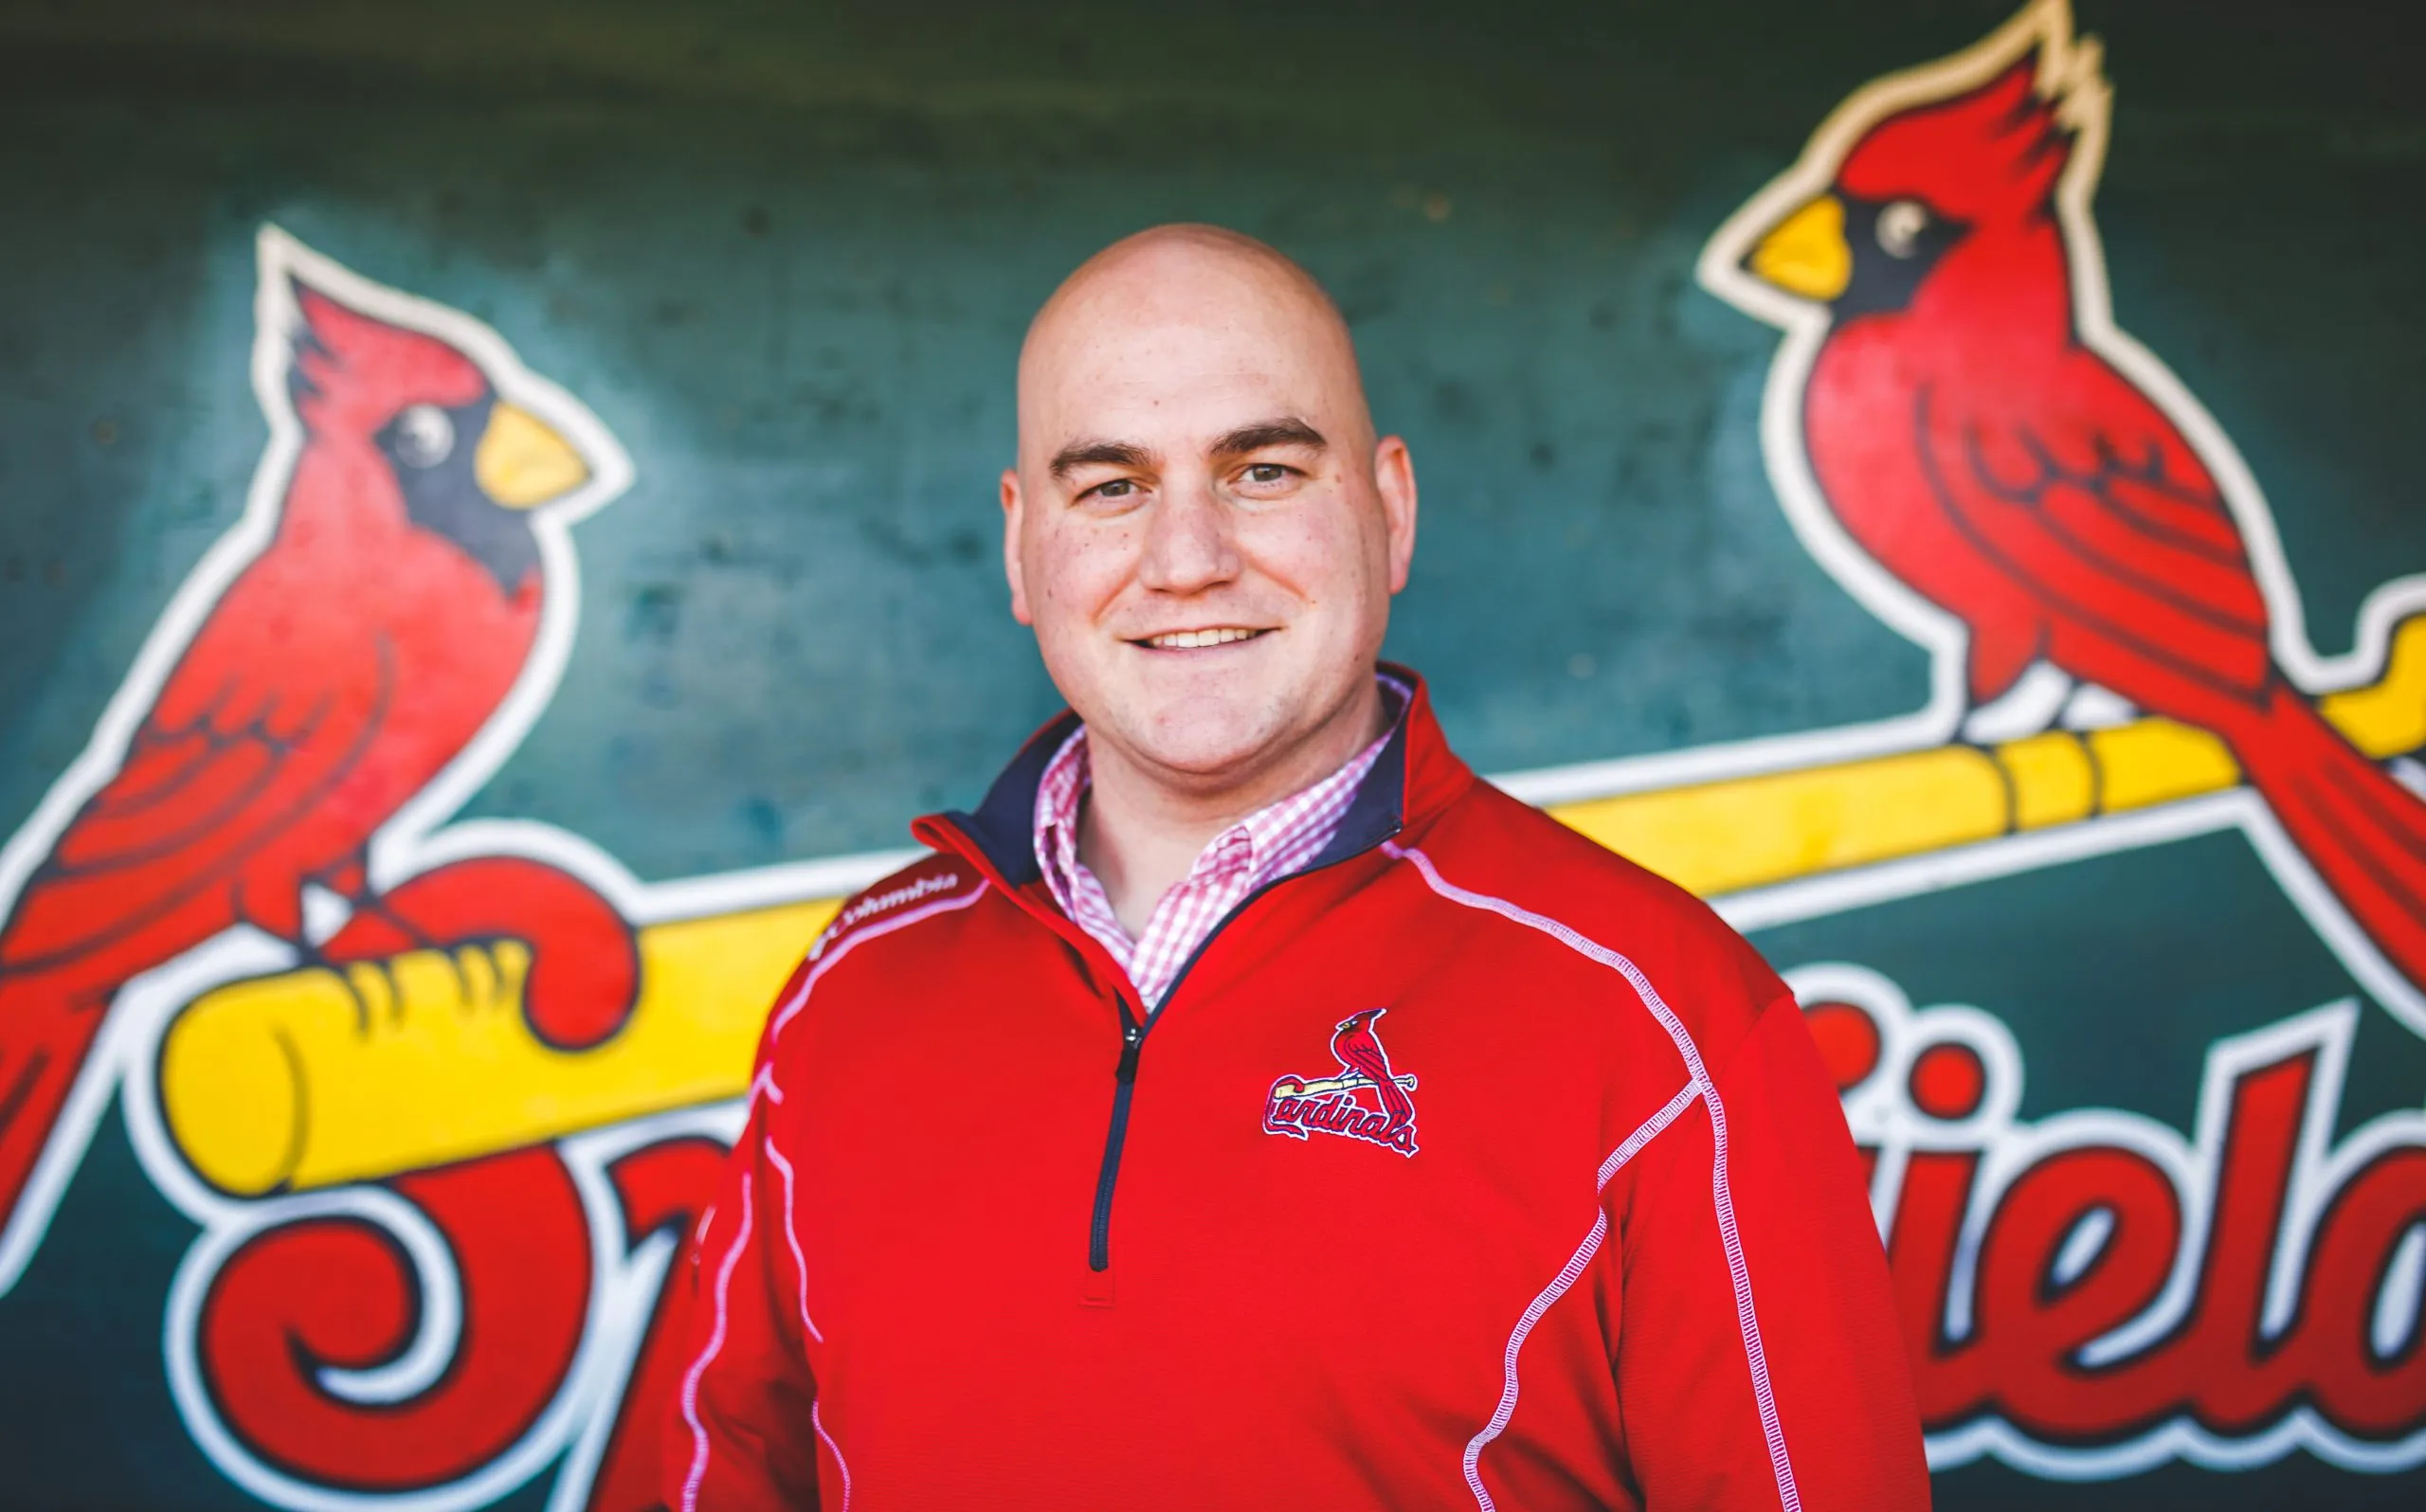 A man in a red jacket poses in front of a Springfield Cardinals logo